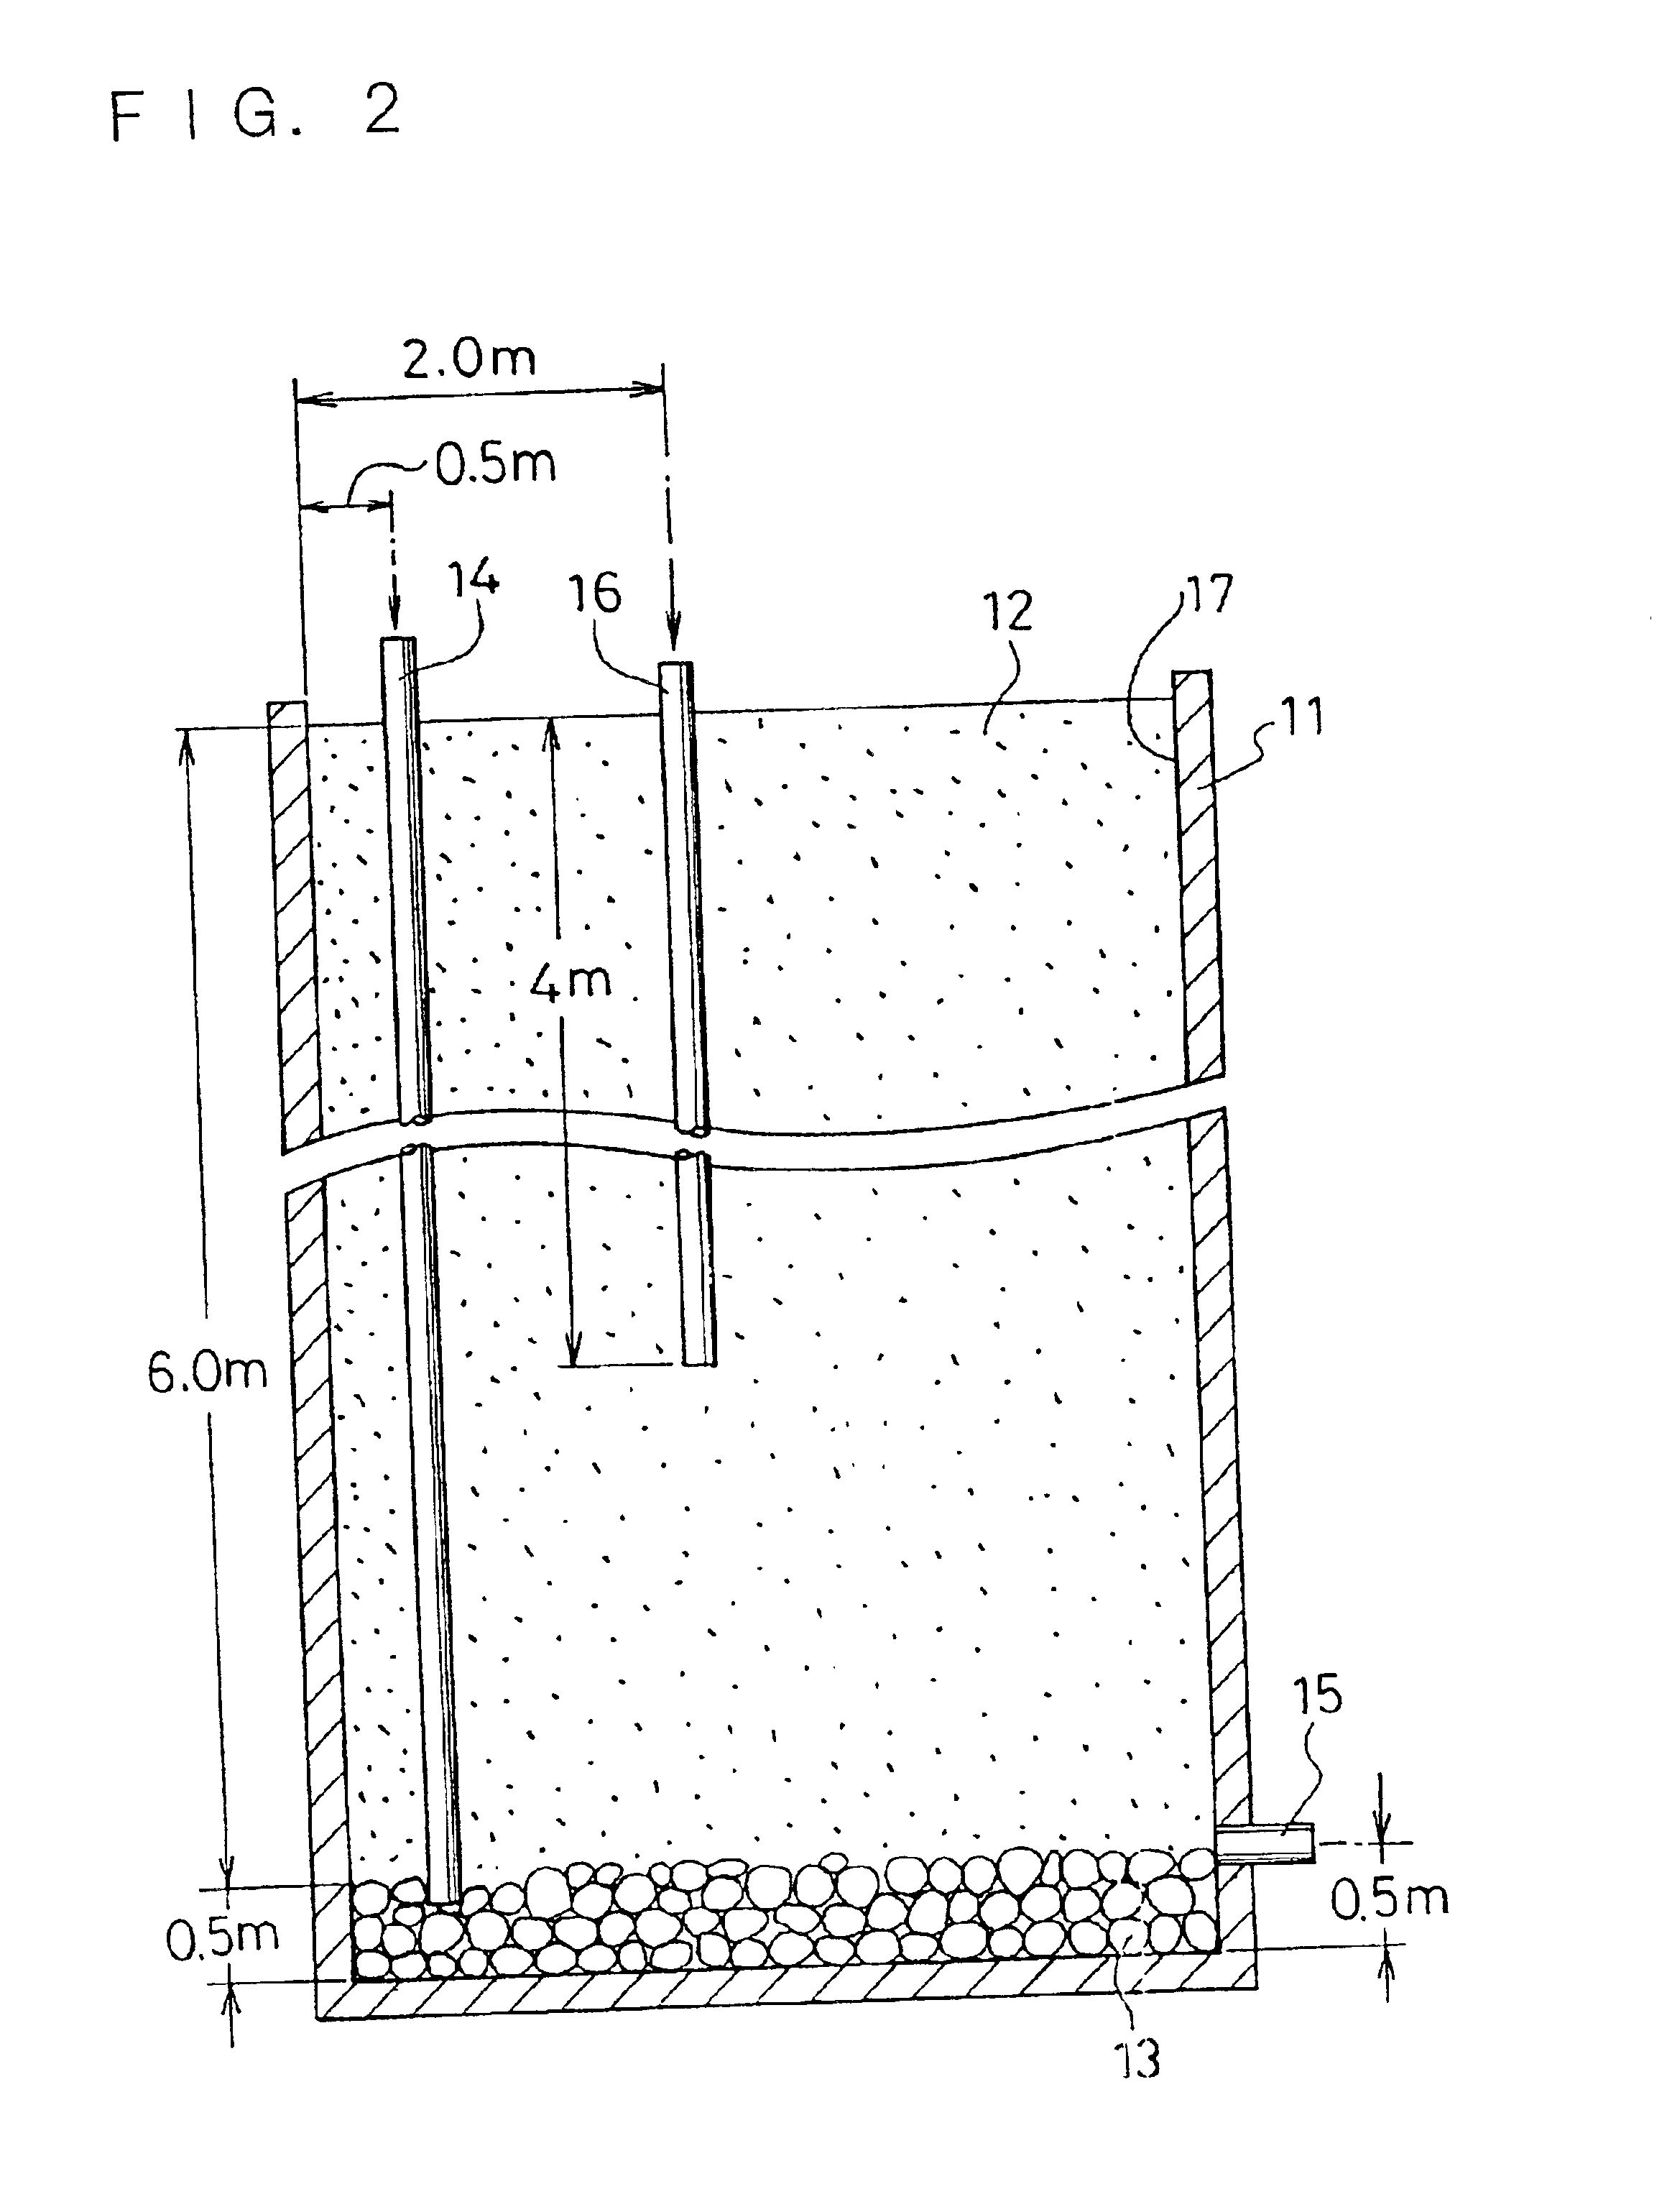 Method of decreasing nitrate nitrogen and volatile organic compound in soil and groundwater